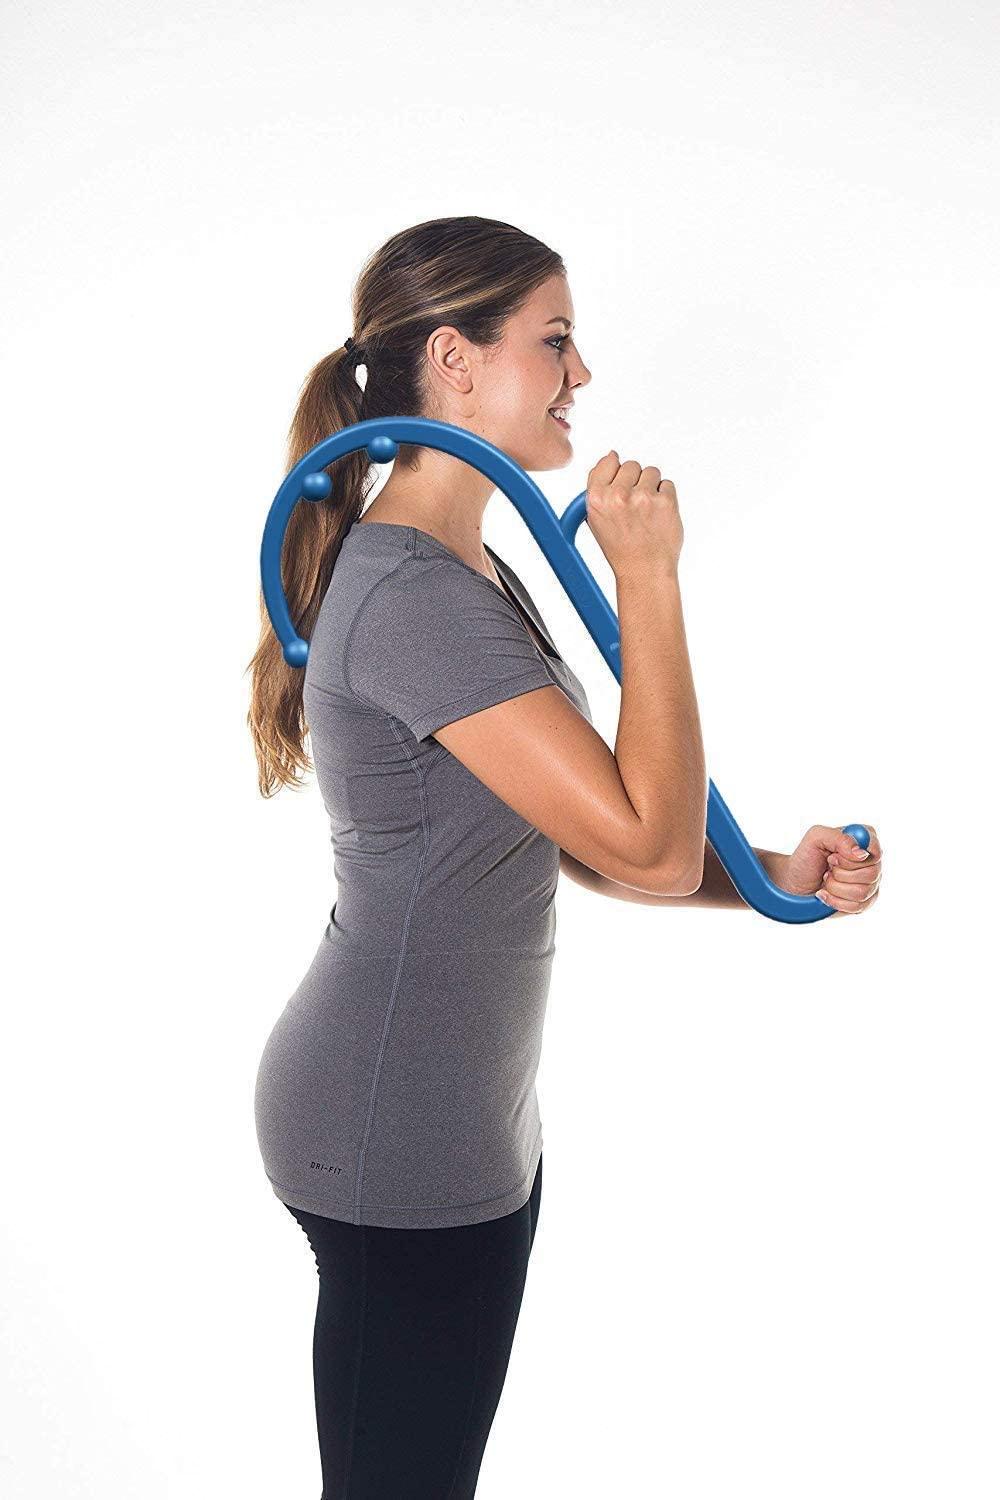 Neck King - Hands-Free Trigger Point Self Massage Tool for The Neck and  Back (Blue)